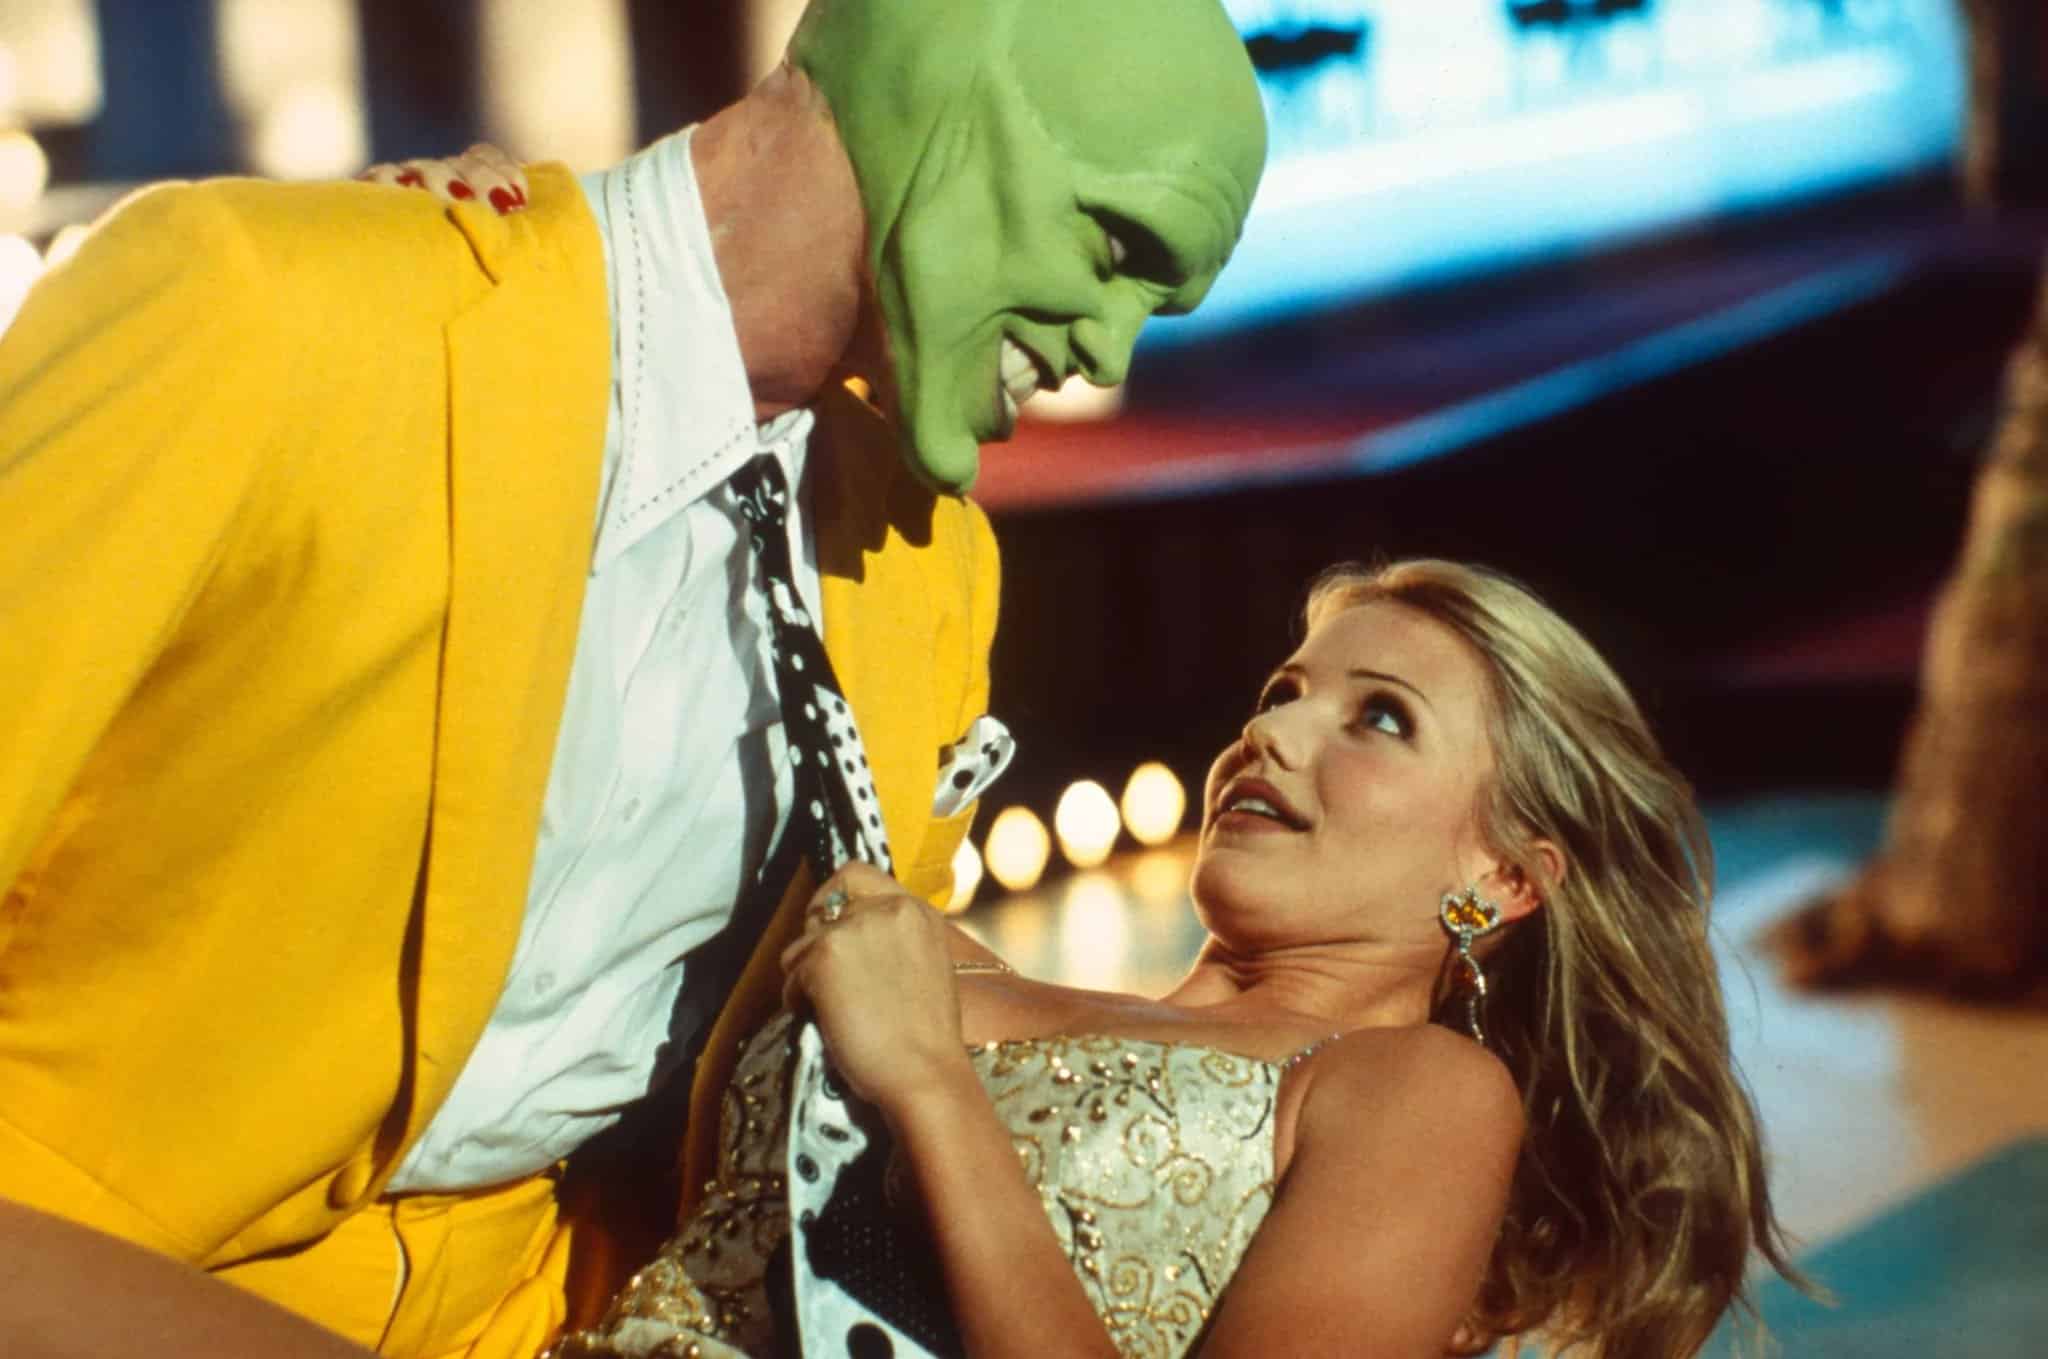 Is Jim Carrey's The Mask About Alcoholism?